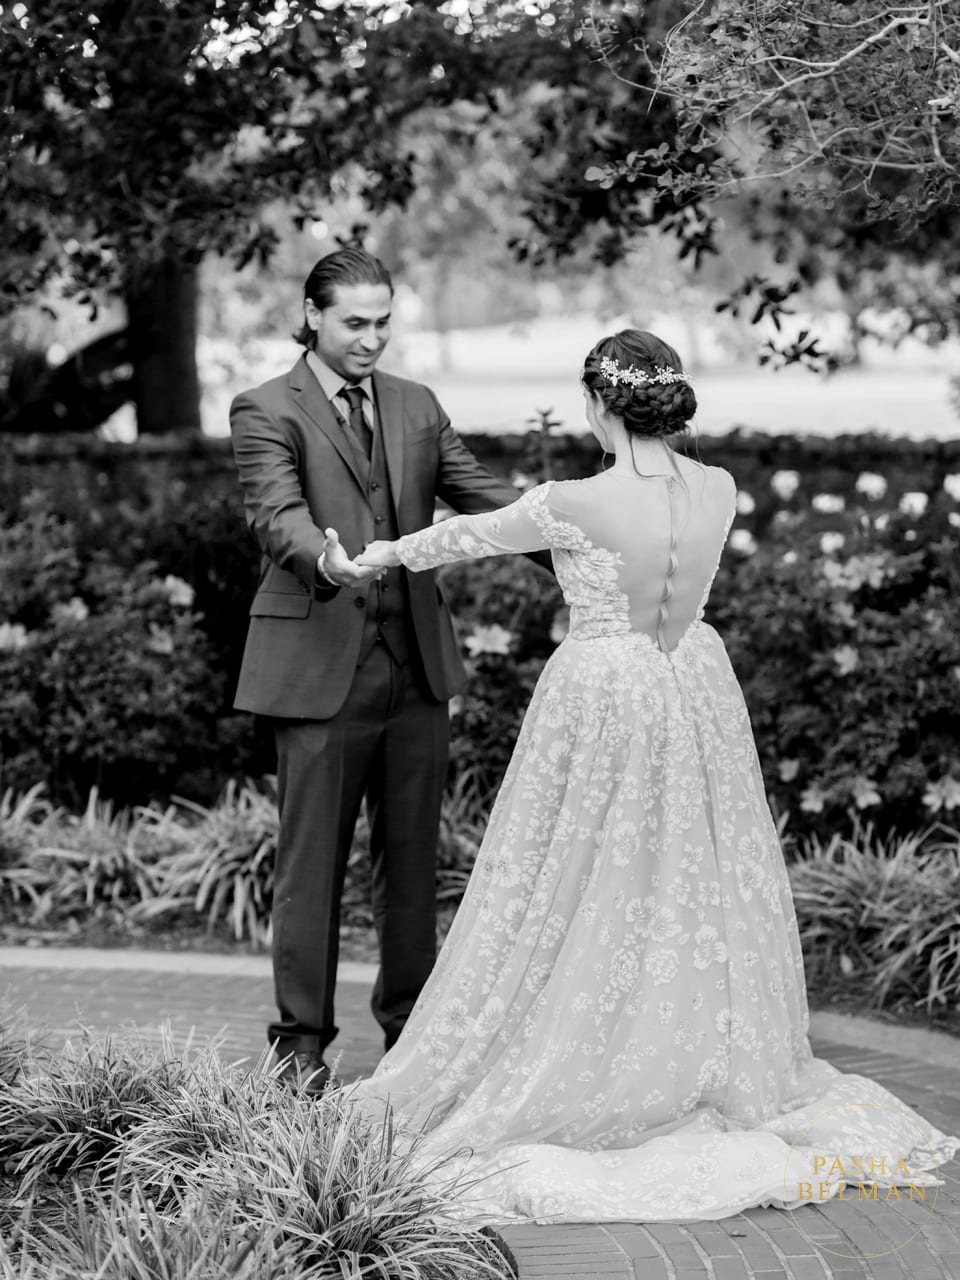 A Jewish Wedding Photography by one of the top Jewish Photographers in Myrtle Beach and Charleston, SC